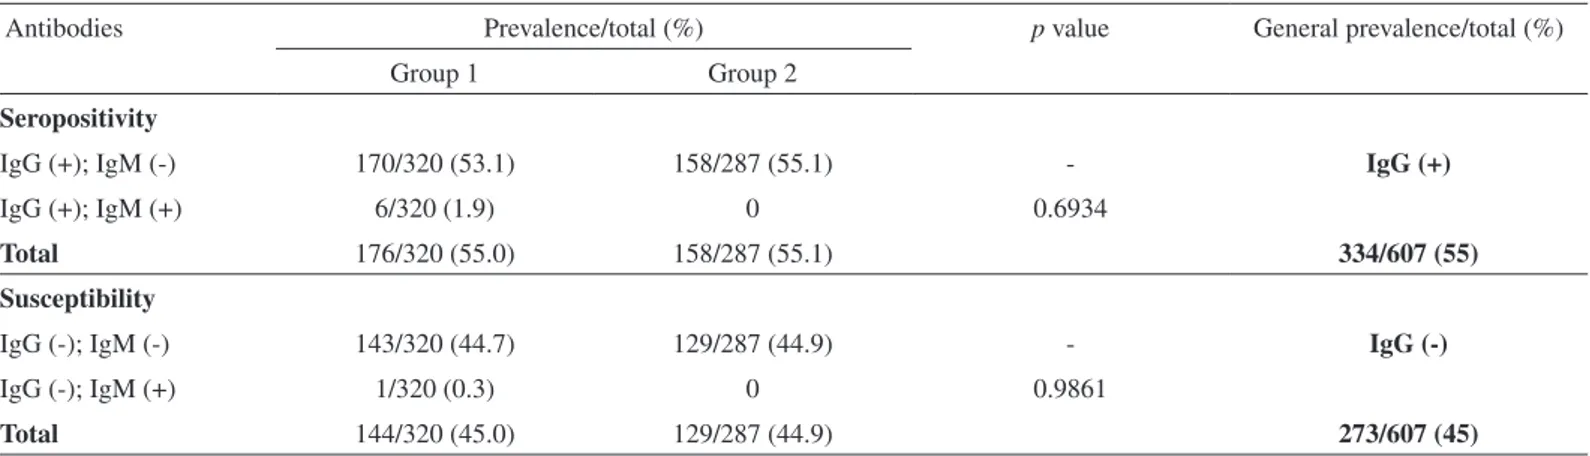 Table 1 shows the prevalence of IgG and IgM in pregnant women  in G I and G II, and the general prevalence presented